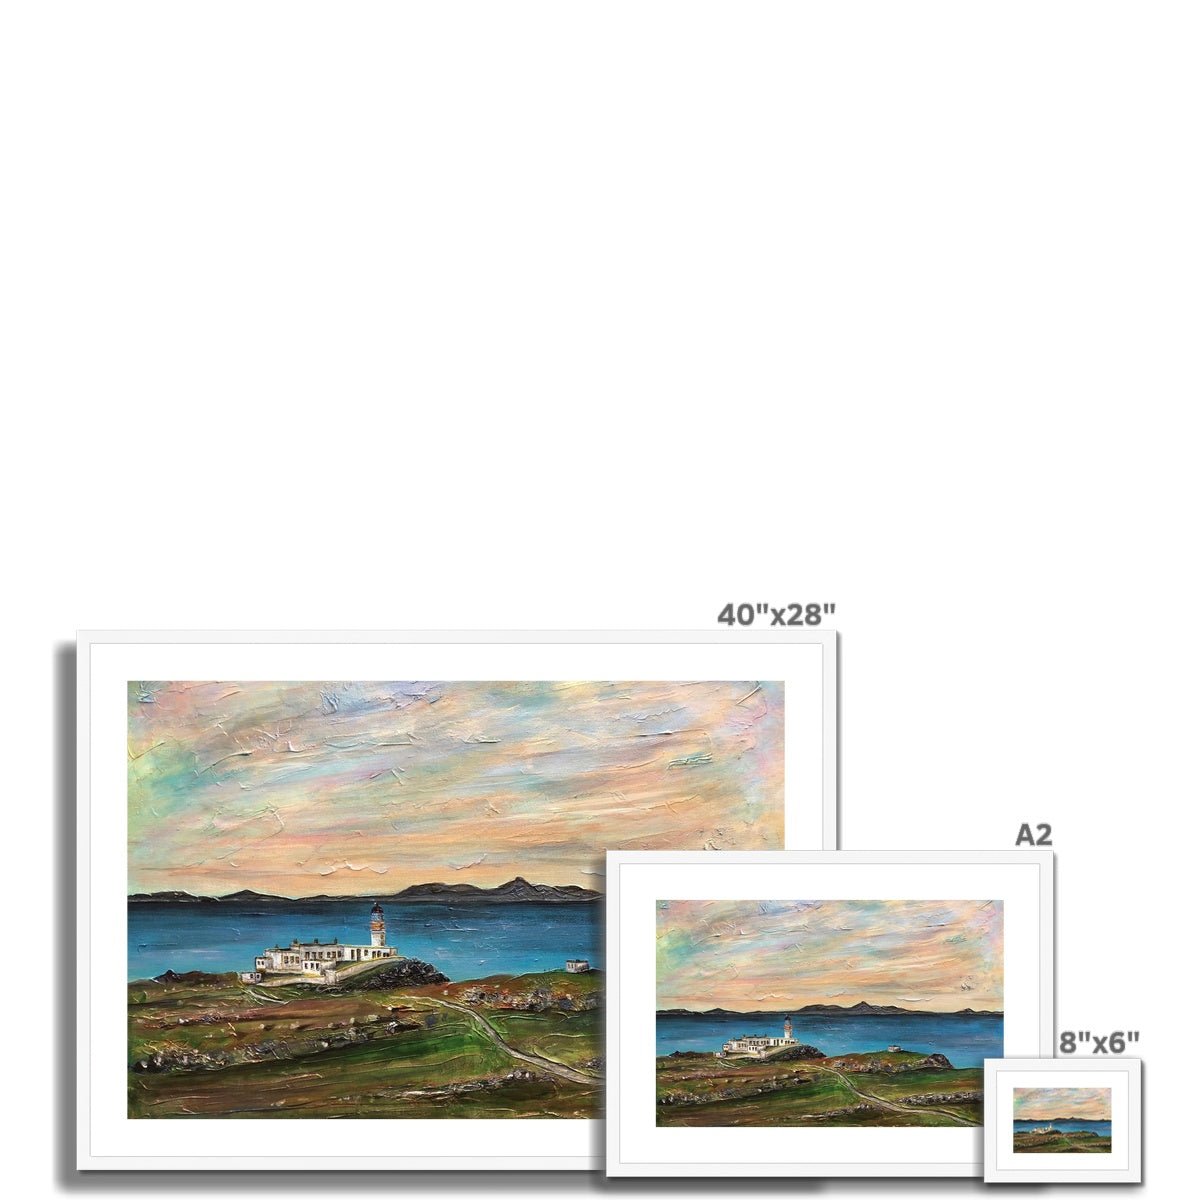 Neist Point Skye Painting | Framed & Mounted Prints From Scotland-Framed & Mounted Prints-Skye Art Gallery-Paintings, Prints, Homeware, Art Gifts From Scotland By Scottish Artist Kevin Hunter